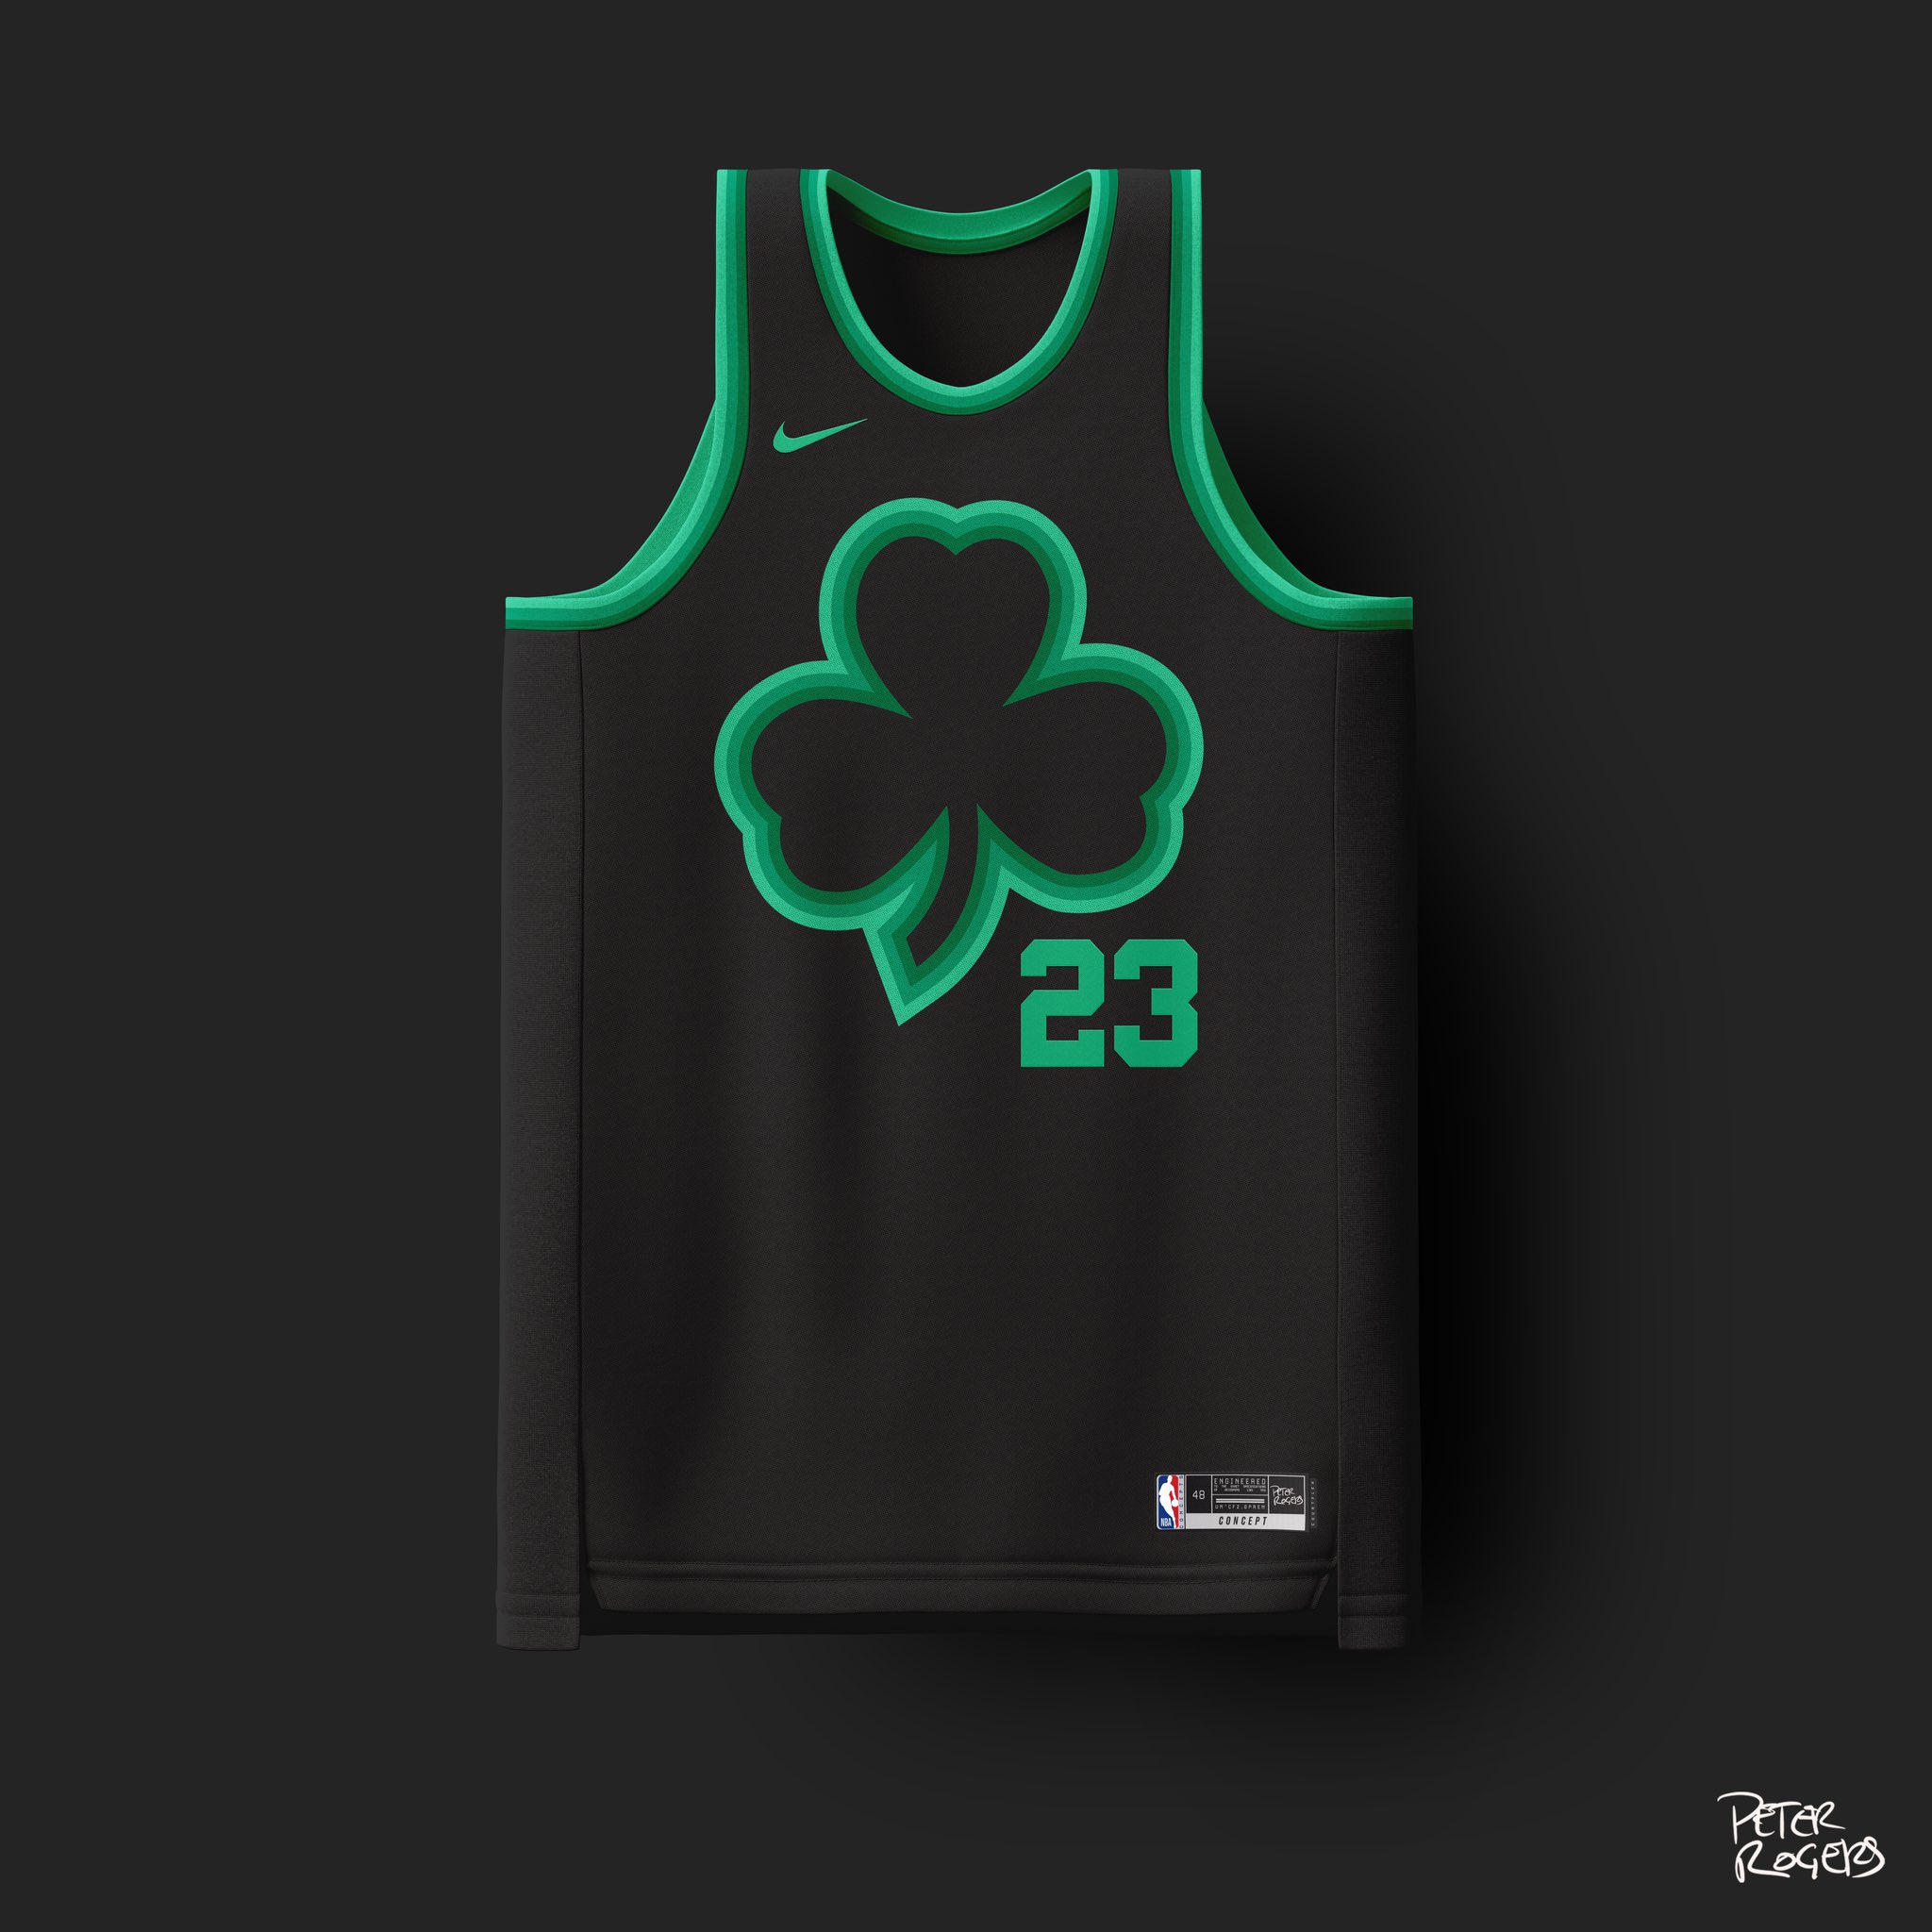 pete rogers, professional diaper changer on X: designing a new celtics  jersey after every win 🍀 record: 9-3  / X